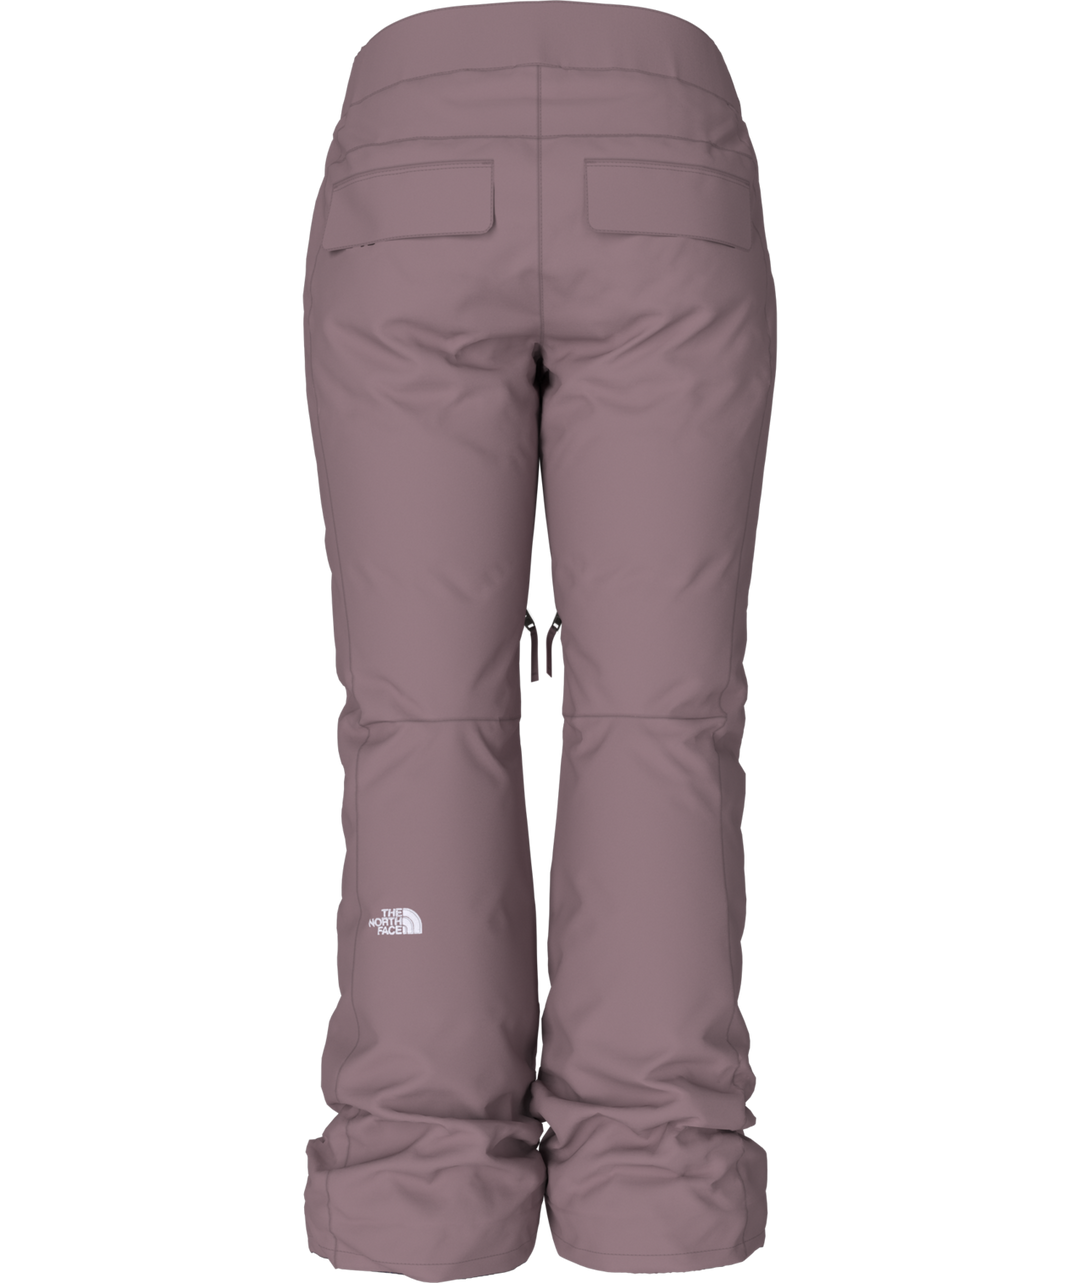 The North Face Aboutaday Pant - Women's 